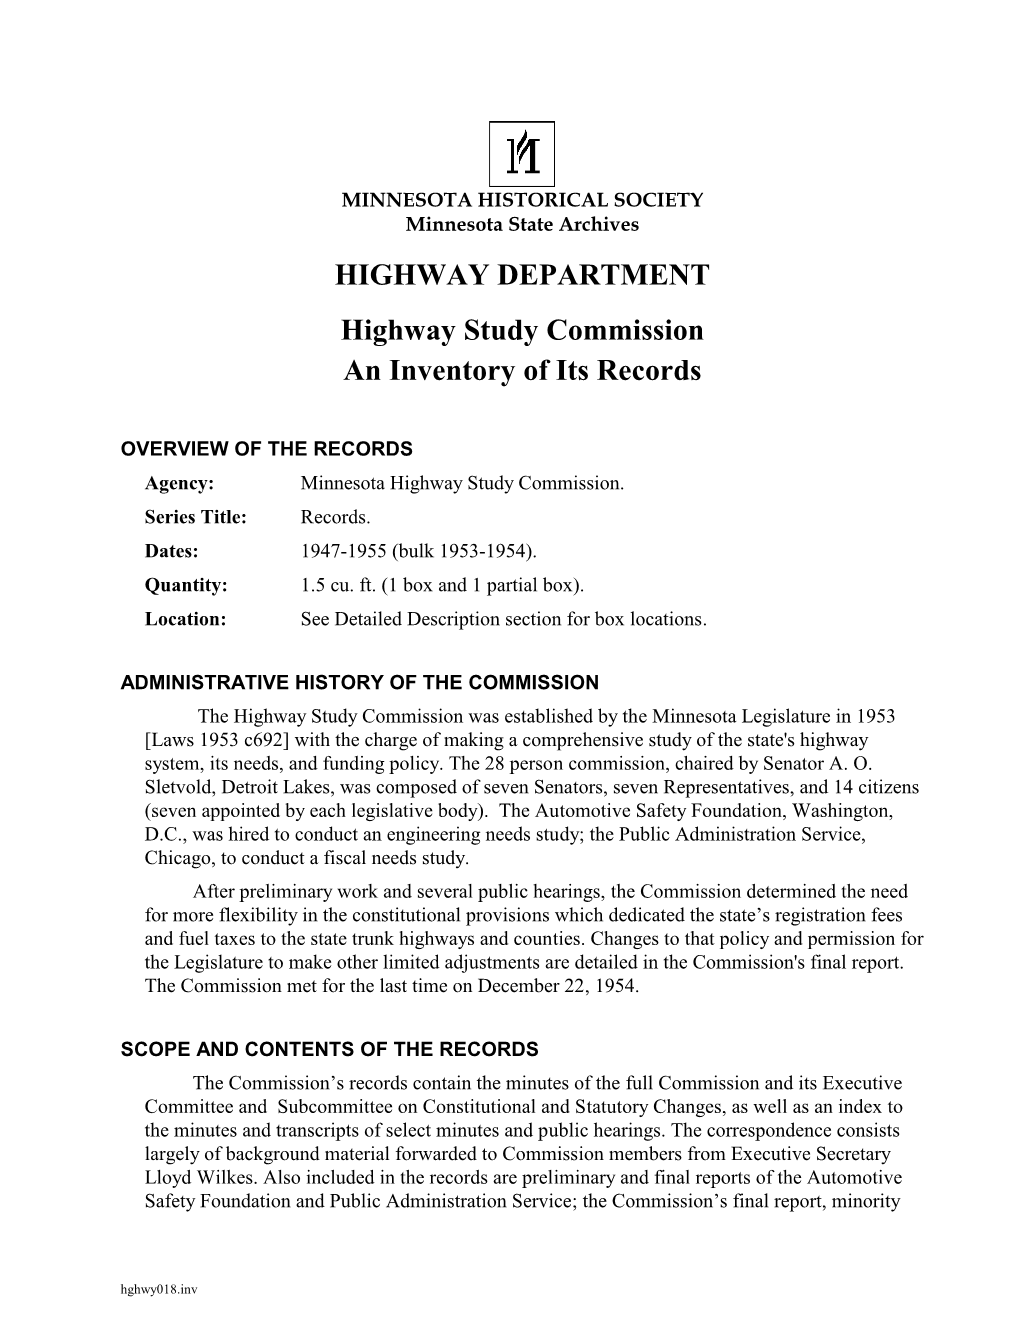 HIGHWAY DEPARTMENT Highway Study Commission an Inventory of Its Records